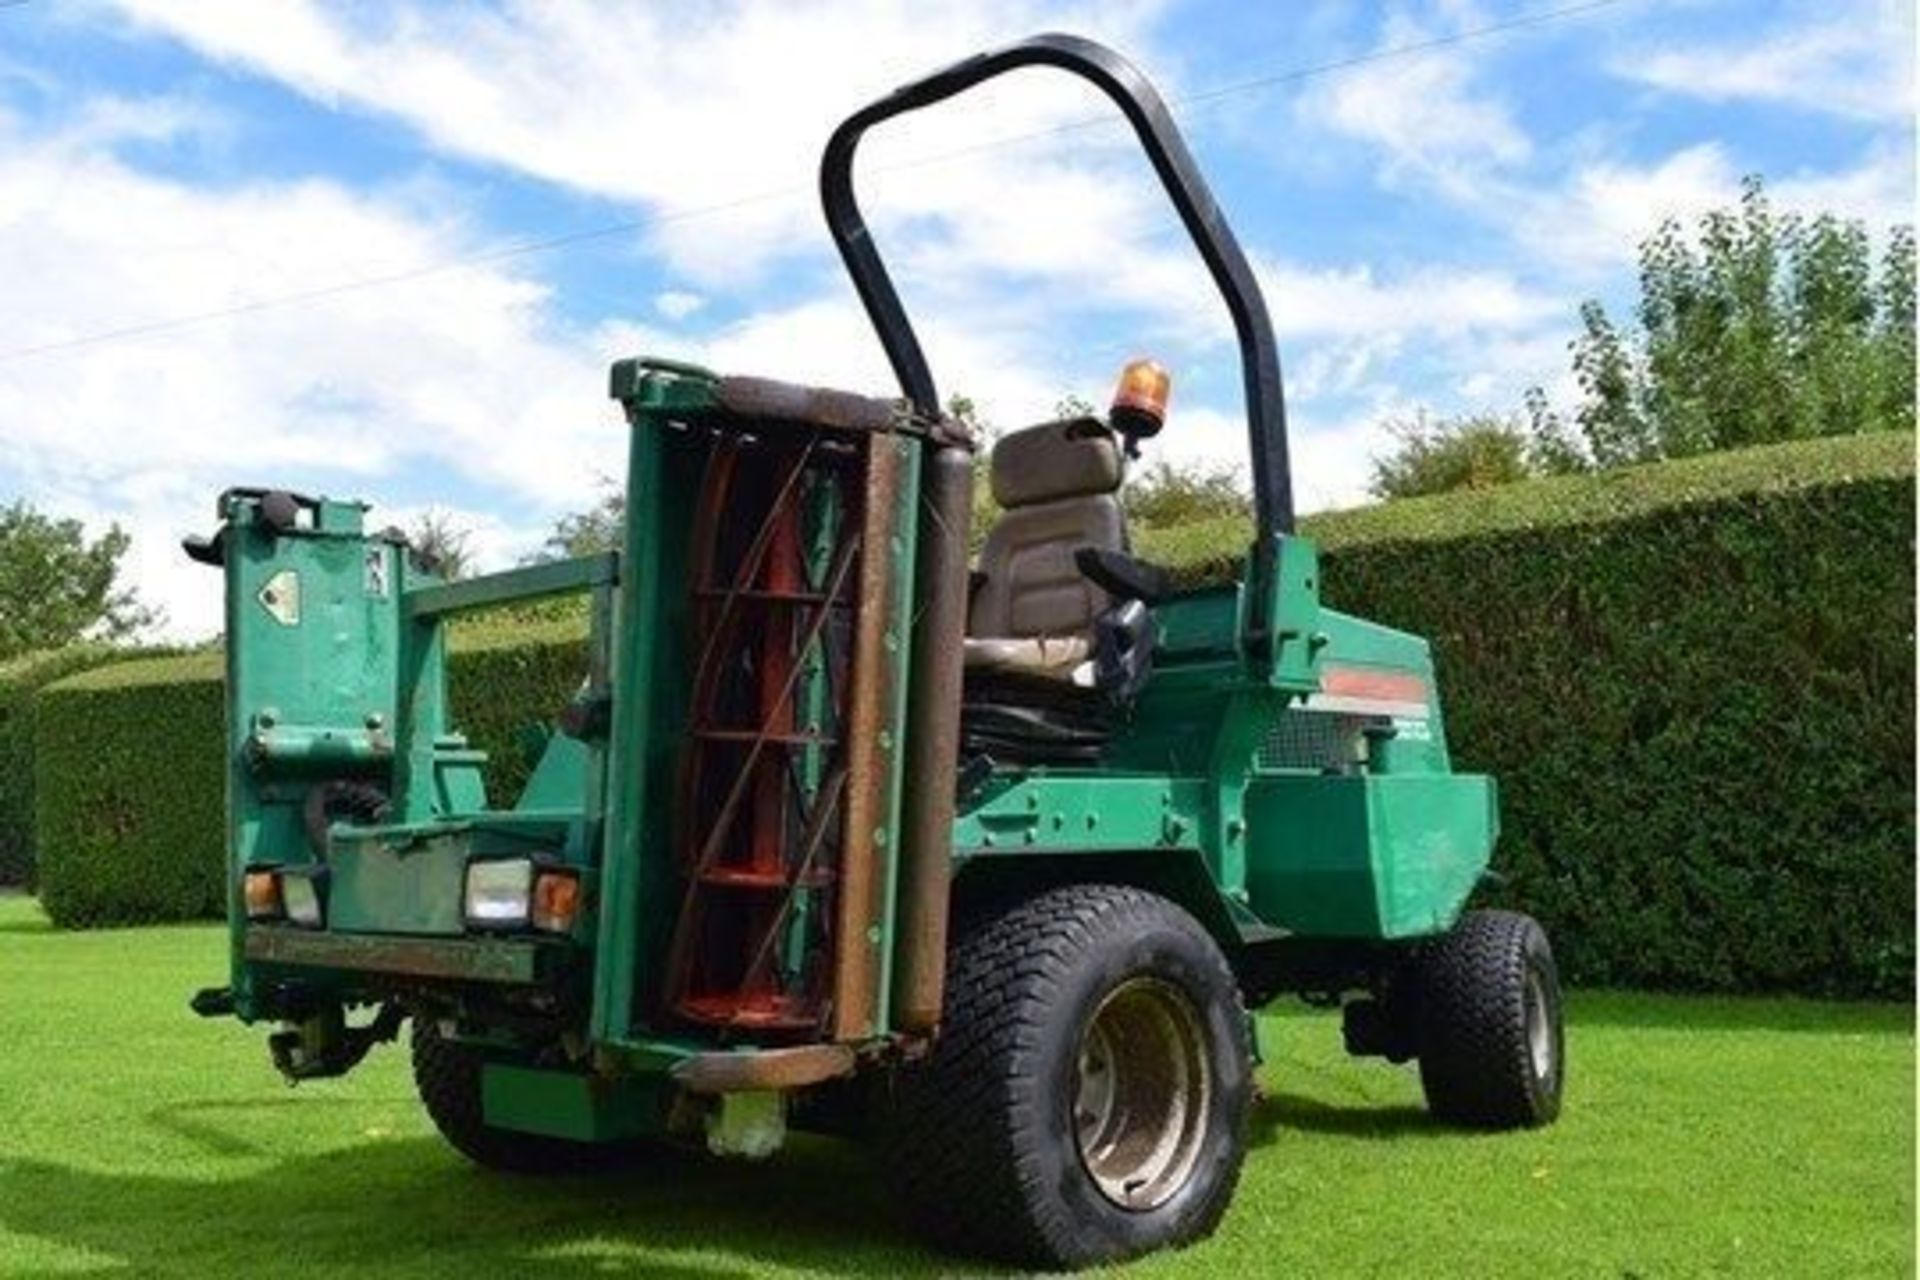 2003 Ransomes Parkway 2250 Plus Ride On Cylinder Mower - Image 7 of 7